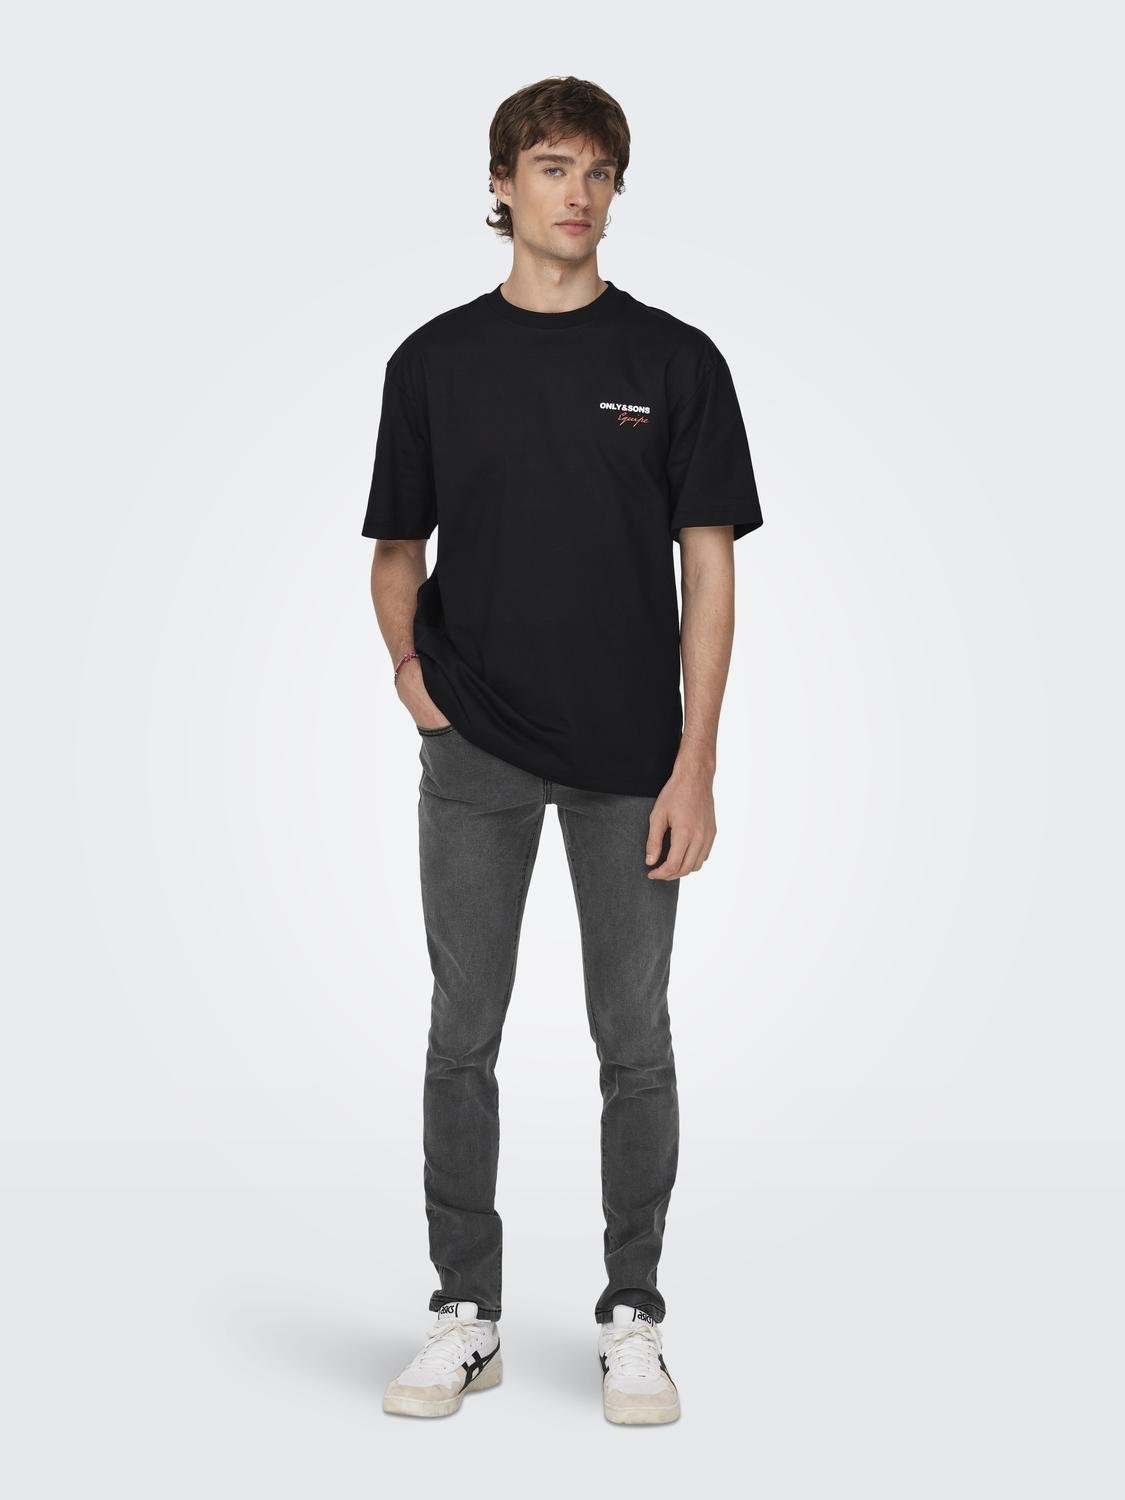 ONLY & SONS Relaxed Fit O-hals T-skjorte -Black - 22027495